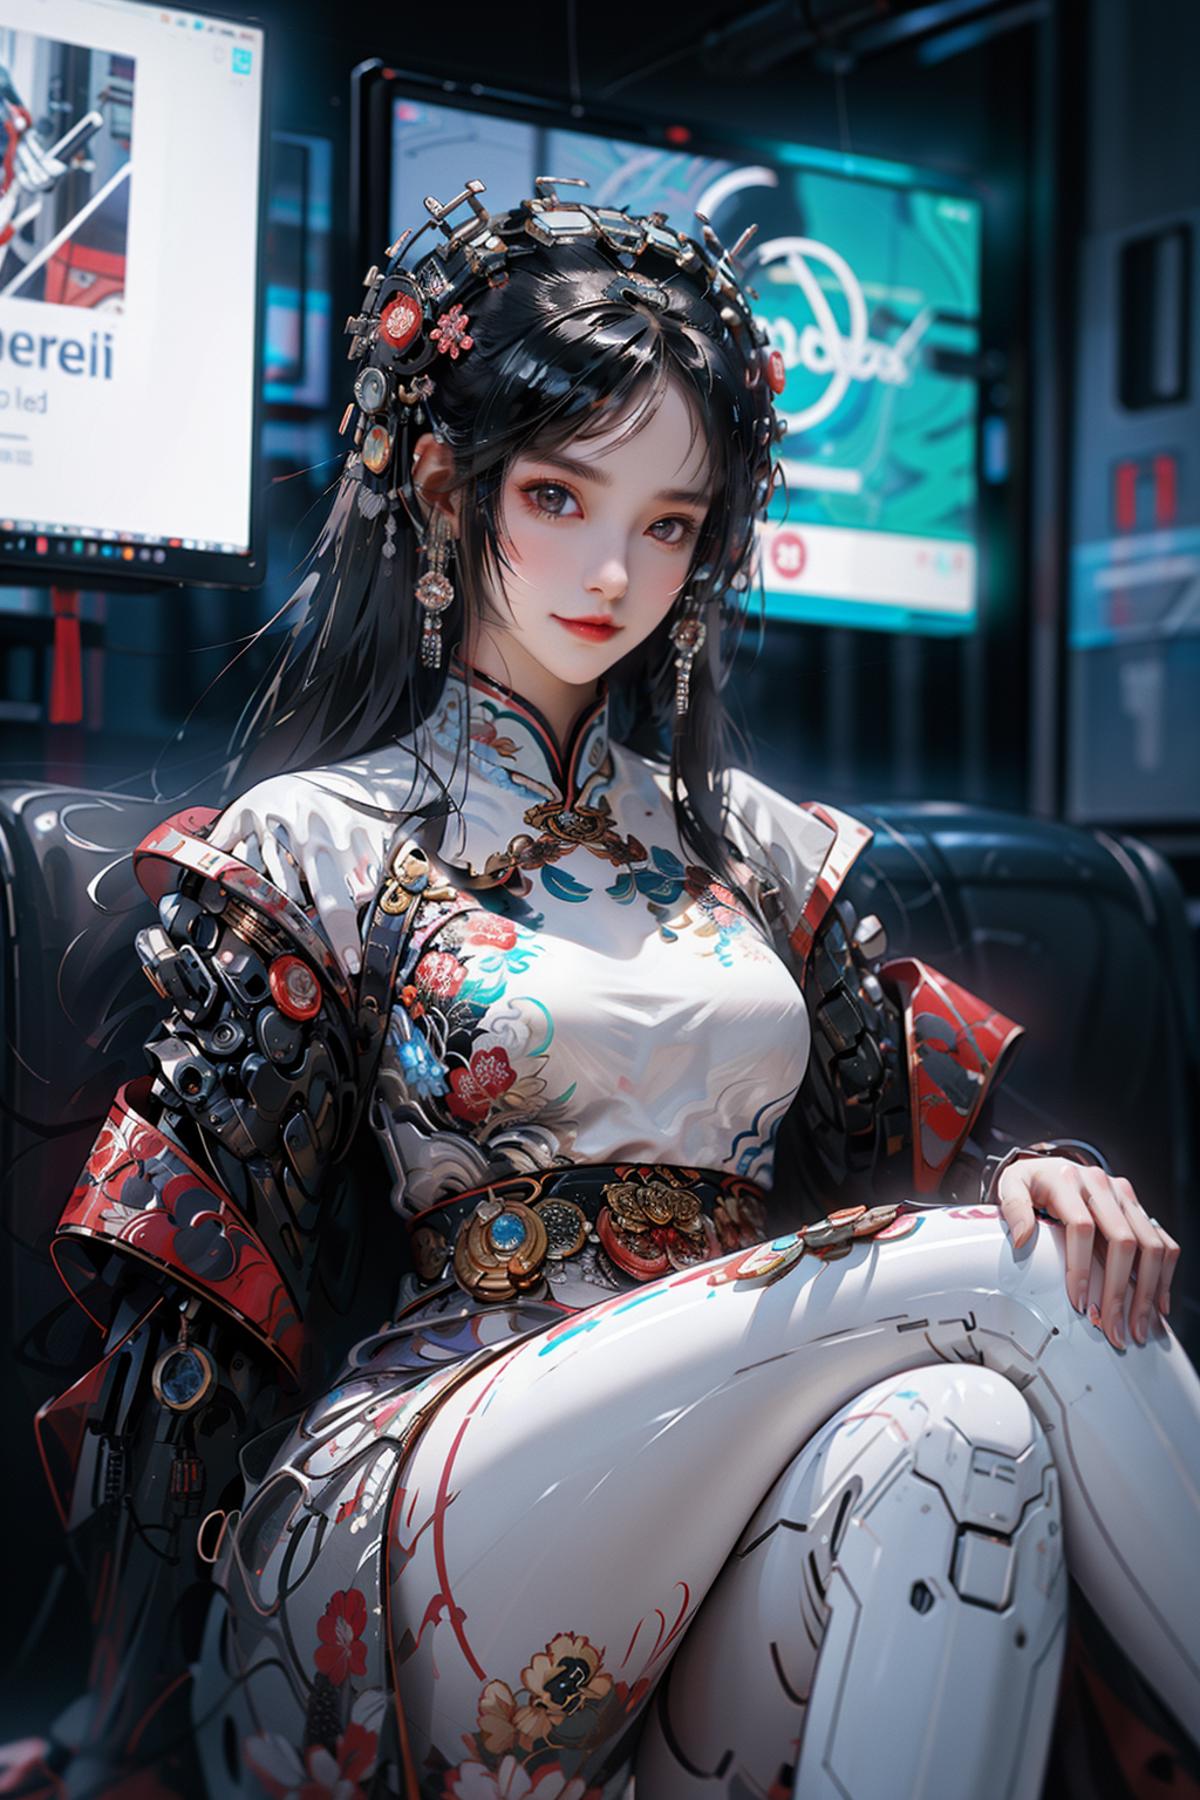 Cyberhanfu 赛博国风/Cyber Chinese style image by pizzagirl